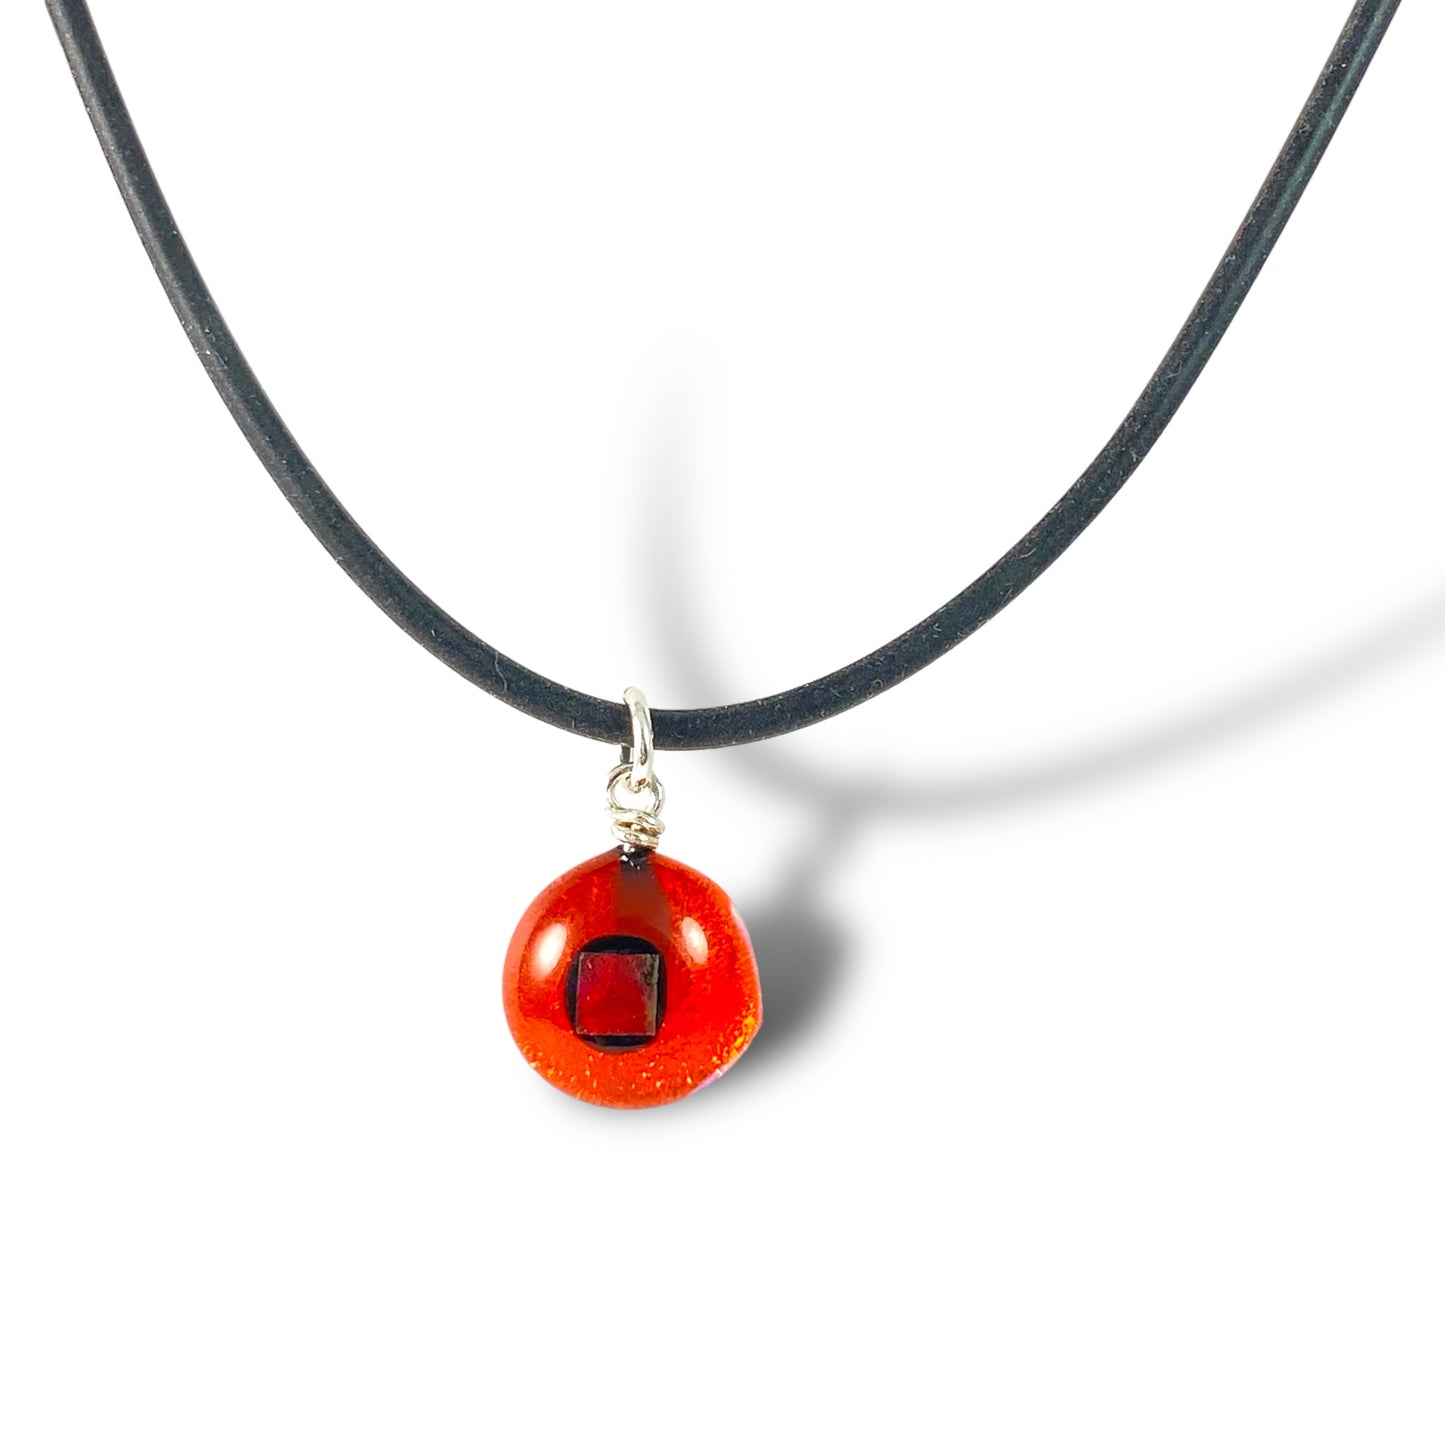 Space Ball Necklace in Tangerine Orange